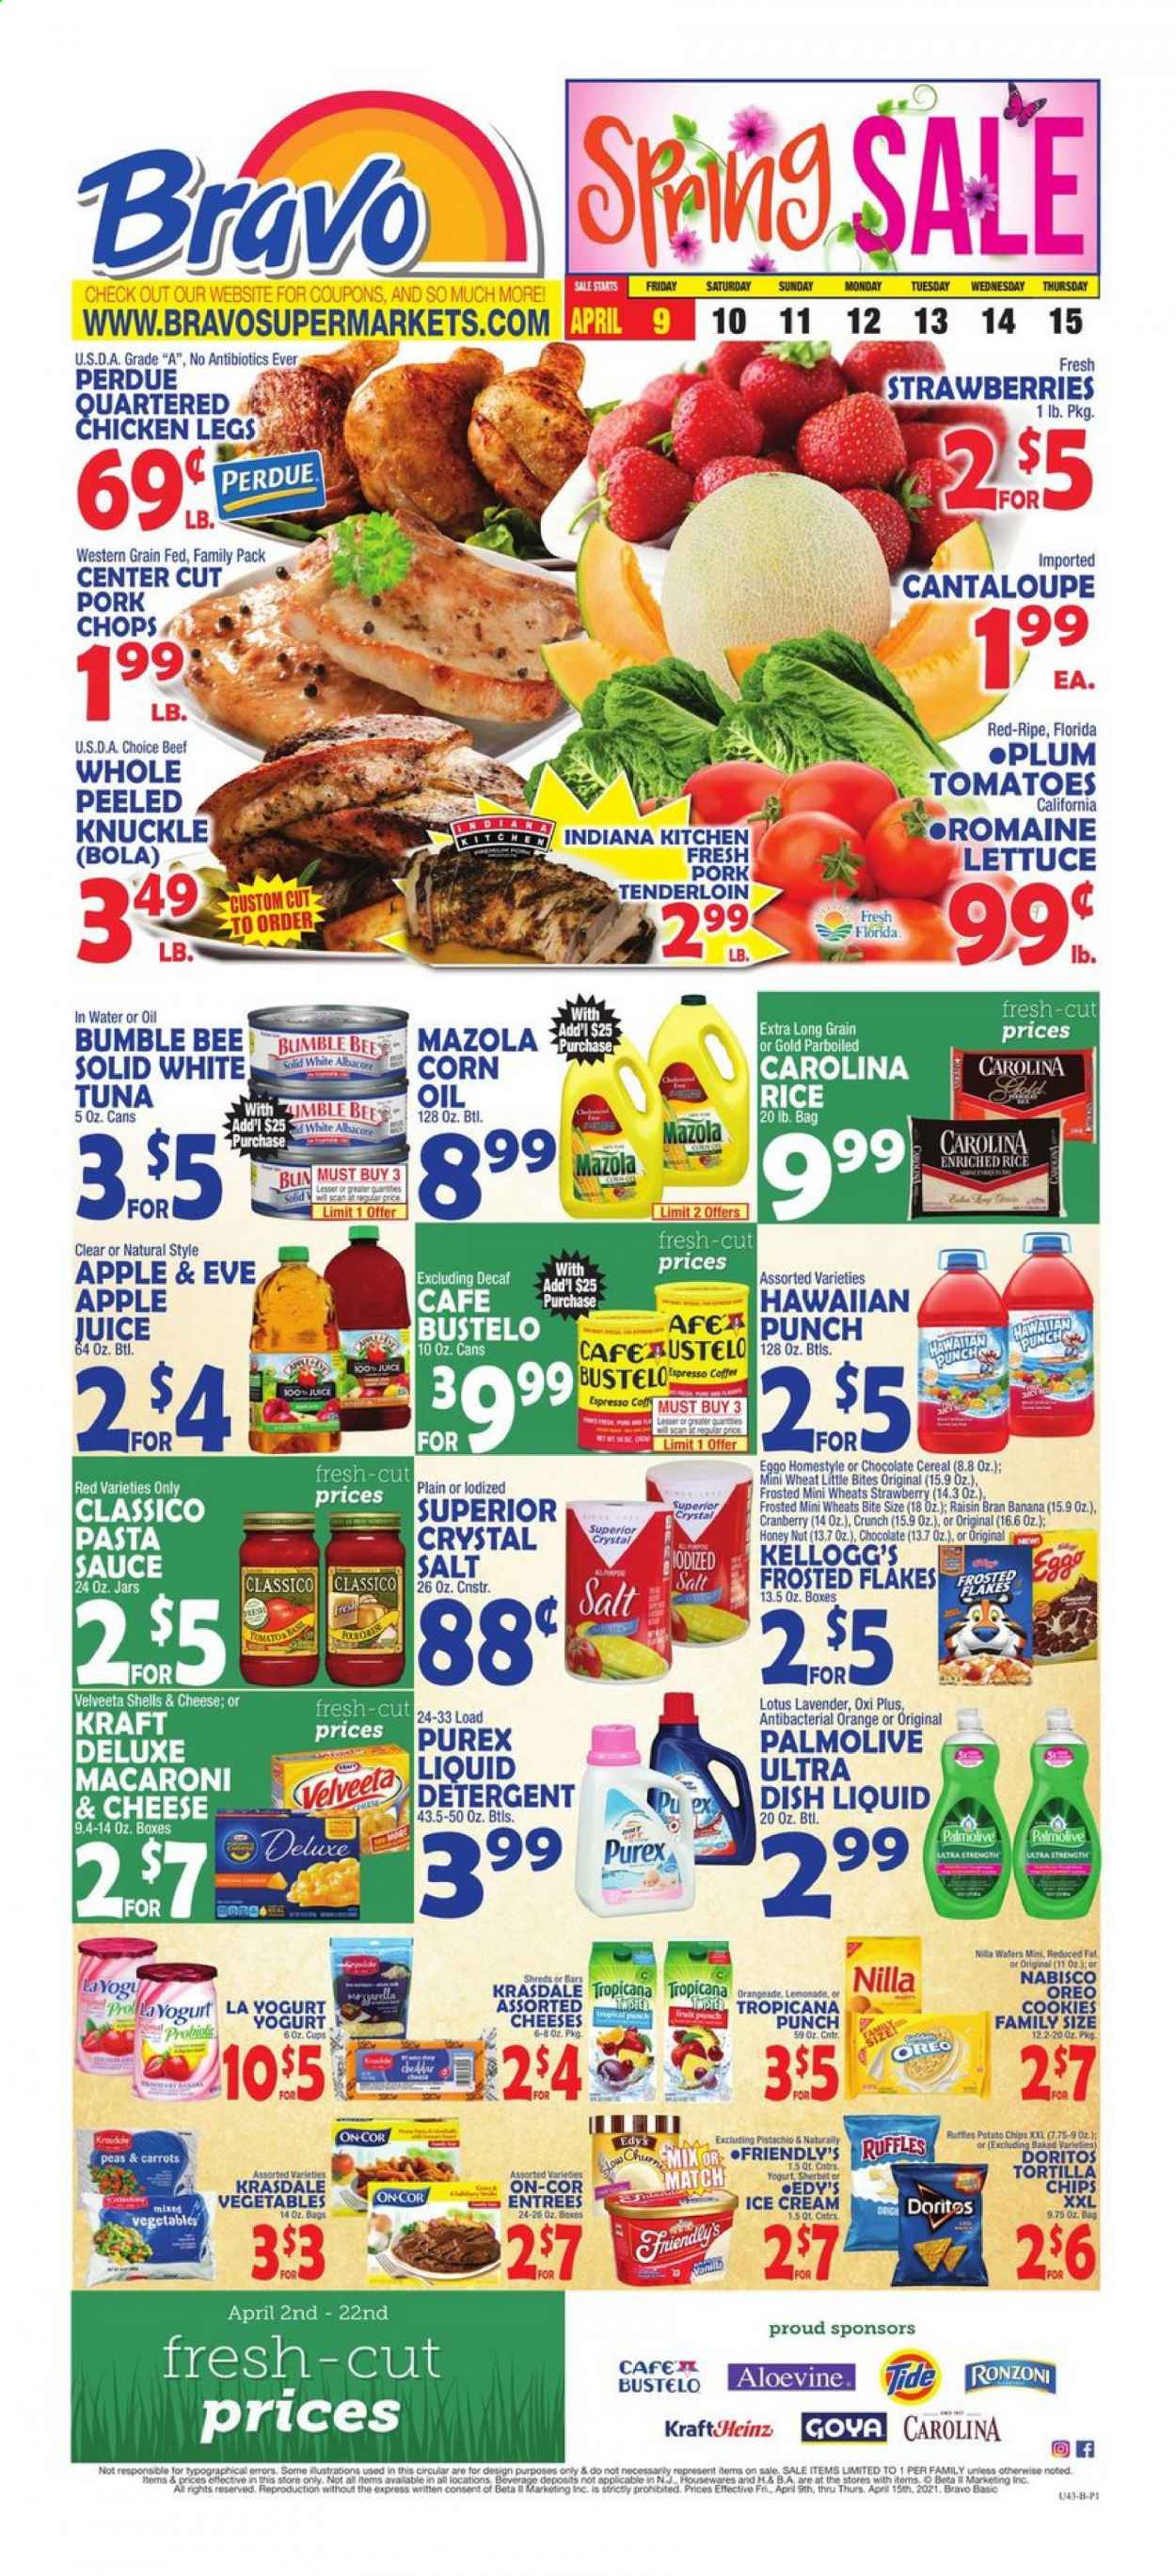 thumbnail - Bravo Supermarkets Flyer - 04/09/2021 - 04/15/2021 - Sales products - cantaloupe, carrots, corn, tomatoes, lettuce, strawberries, oranges, tuna, macaroni & cheese, Bumble Bee, sauce, Perdue®, Kraft®, Oreo, ice cream, sherbet, Friendly's Ice Cream, cookies, Kellogg's, Little Bites, Doritos, tortilla chips, chips, Ruffles, salt, cereals, Frosted Flakes, Raisin Bran, rice, pasta, parboiled rice, Classico, corn oil, pistachios, juice, fruit punch, chicken legs, pork chops, pork meat, pork tenderloin. Page 1.